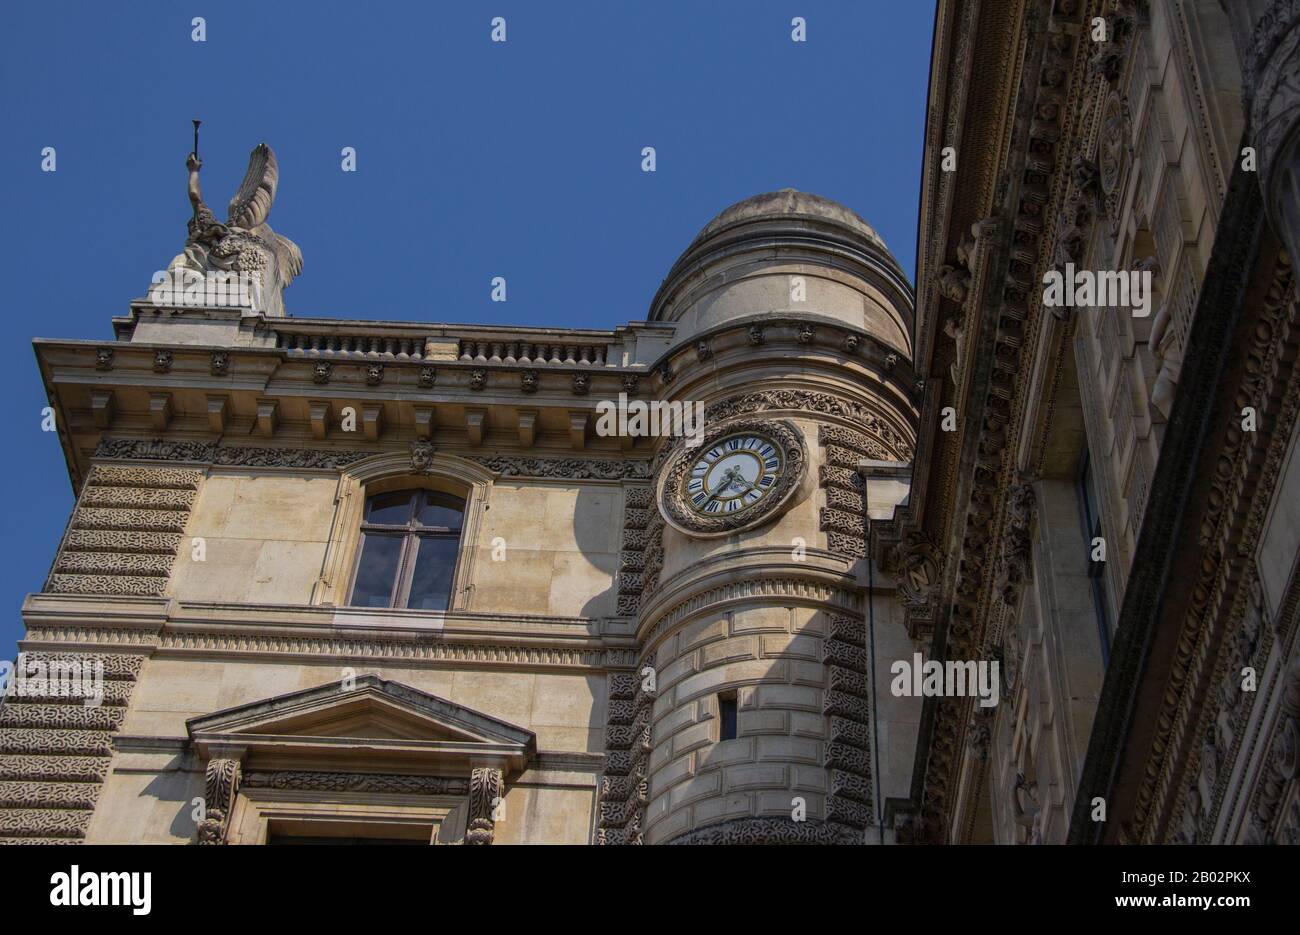 Inset clock on Louvre building Stock Photo